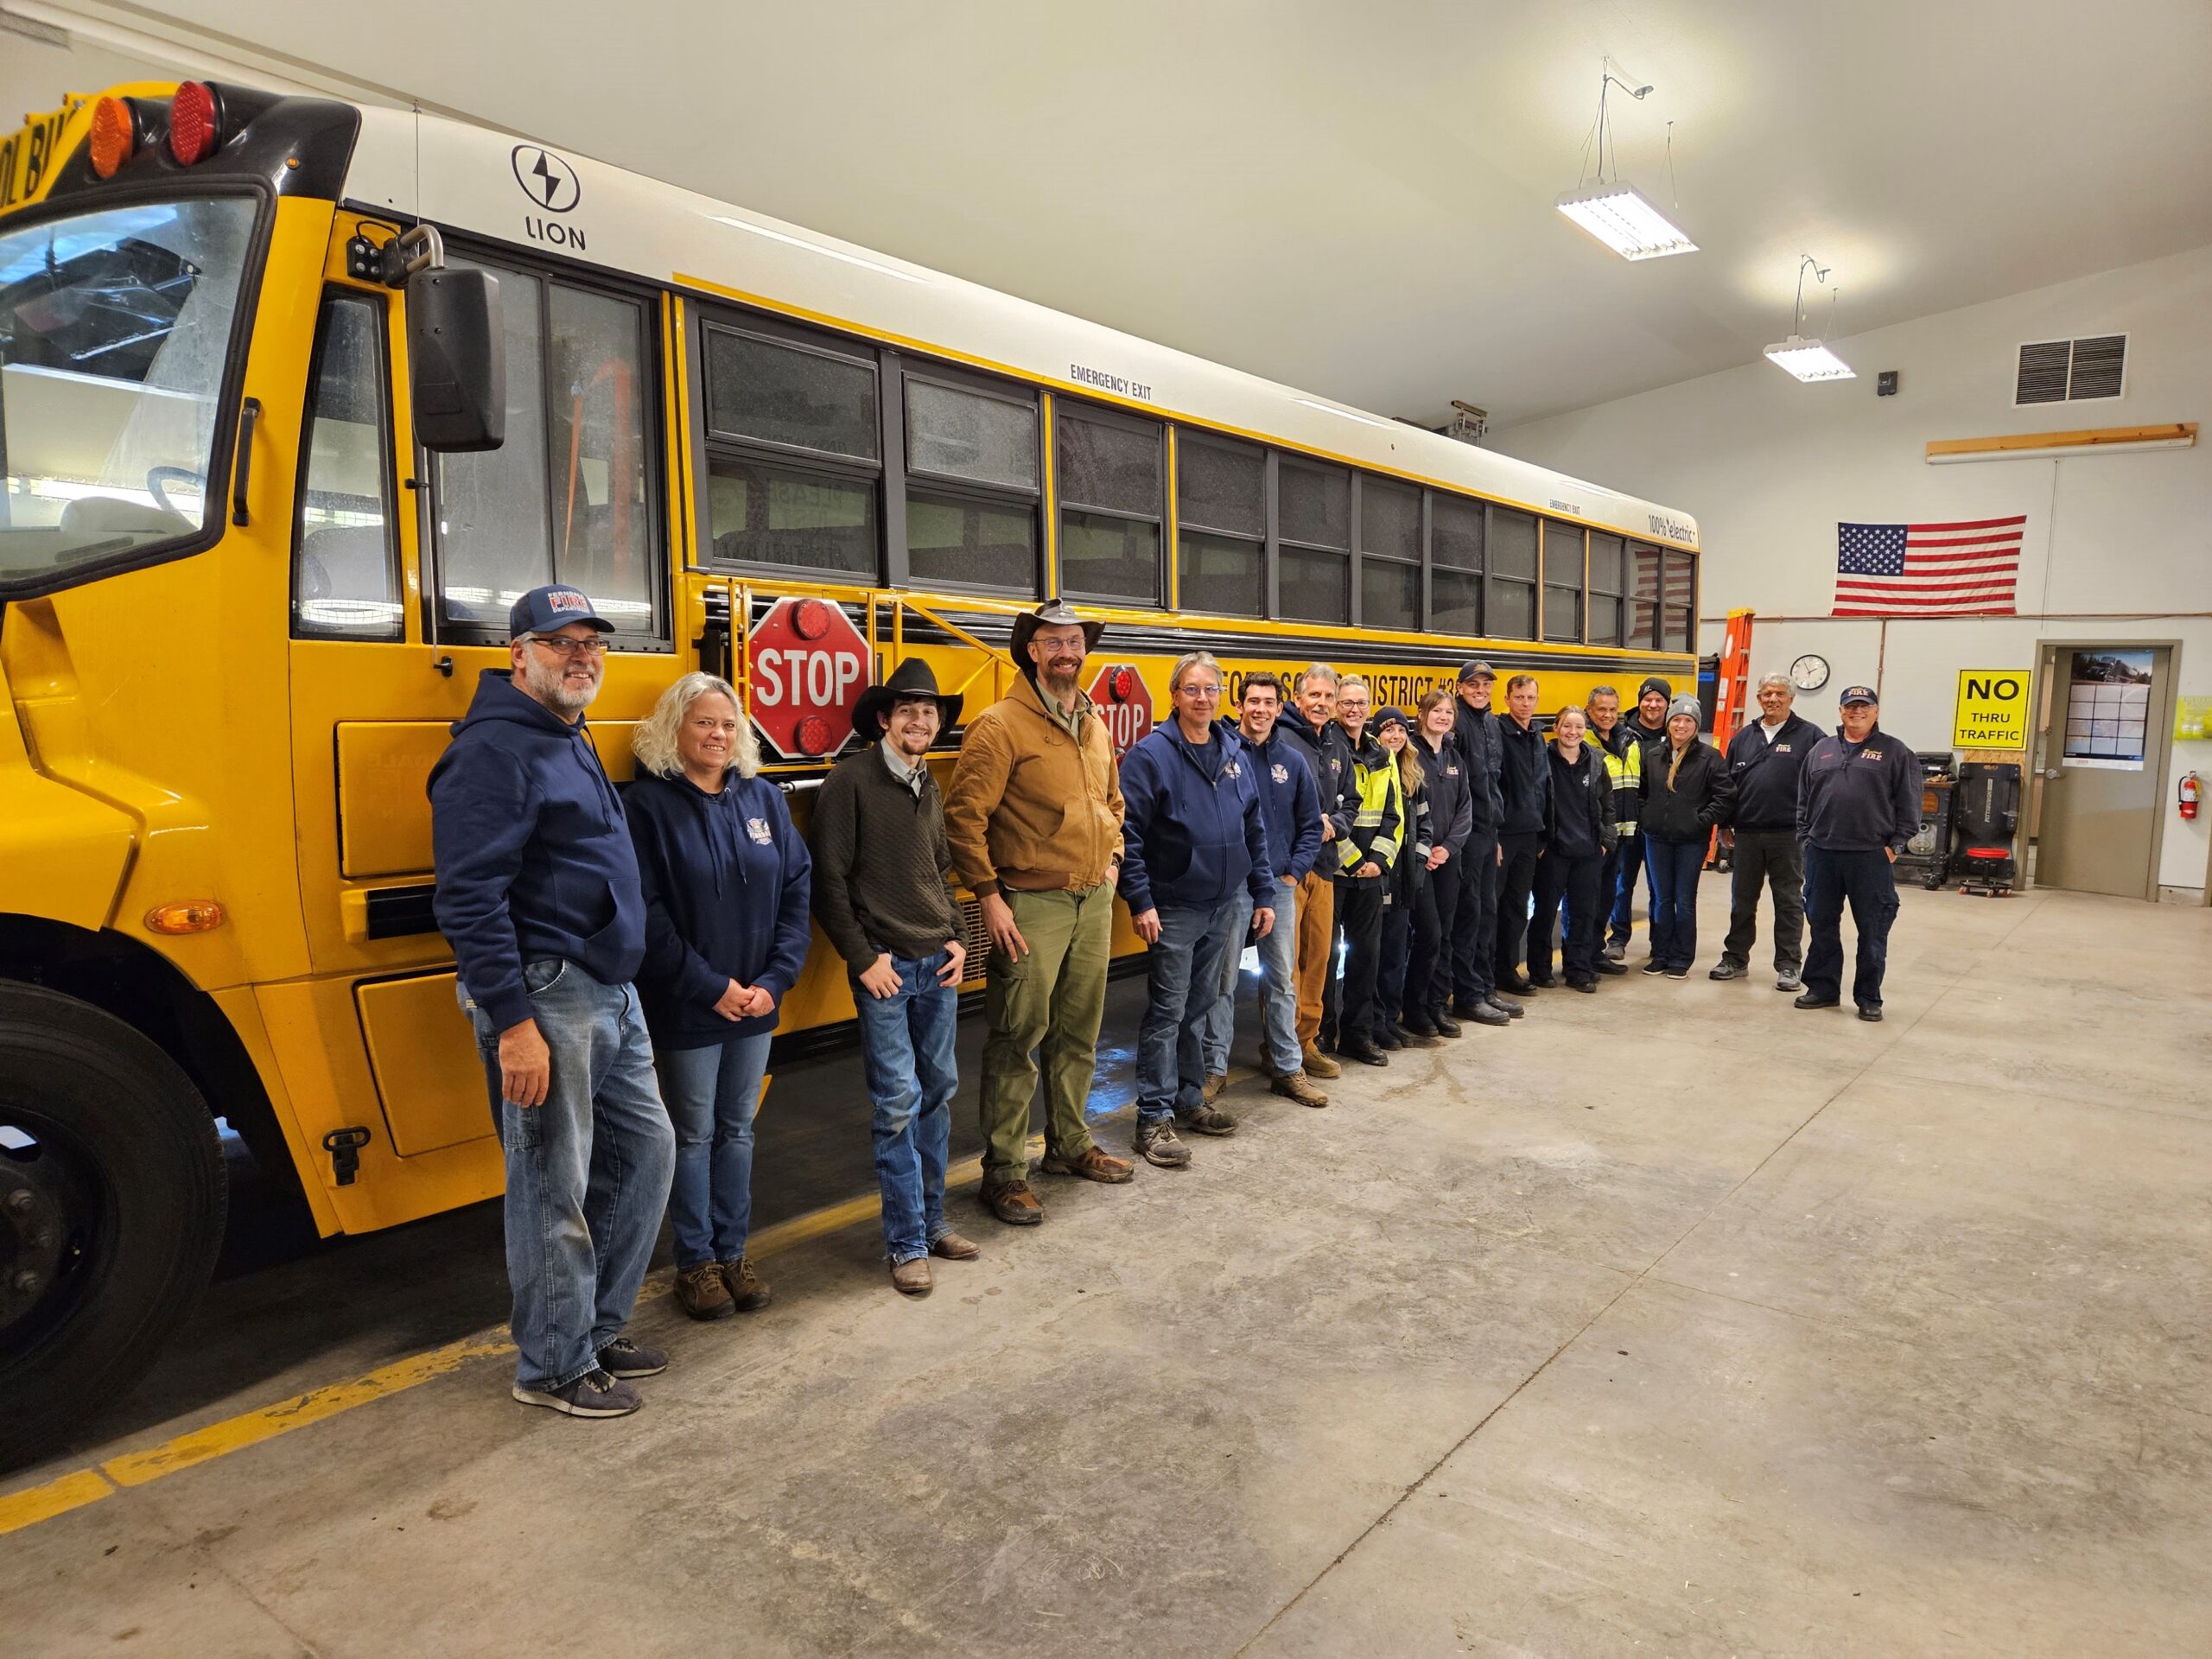 Members of Bigfork and Ferndale fire departments stand in front of Bigfork's electric school bus after completing a safety training on the bus.